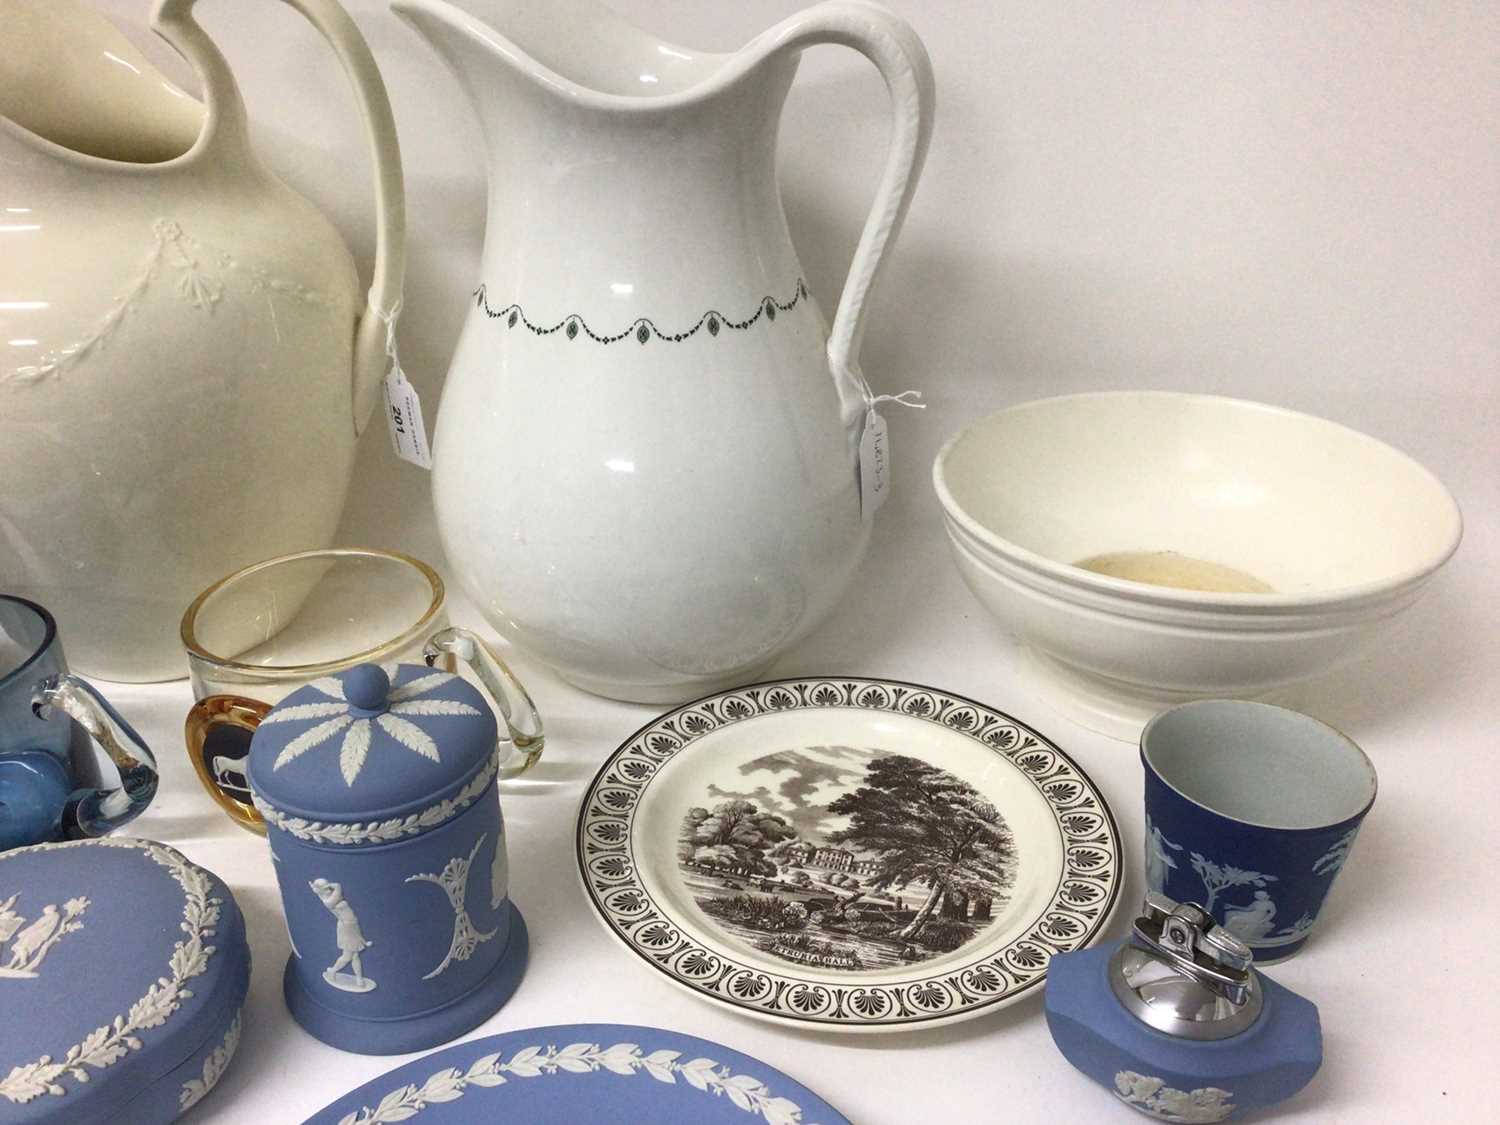 Wedgwood Queensware wash jug, moulded with garlands, another wash jug, and other items - Image 3 of 5